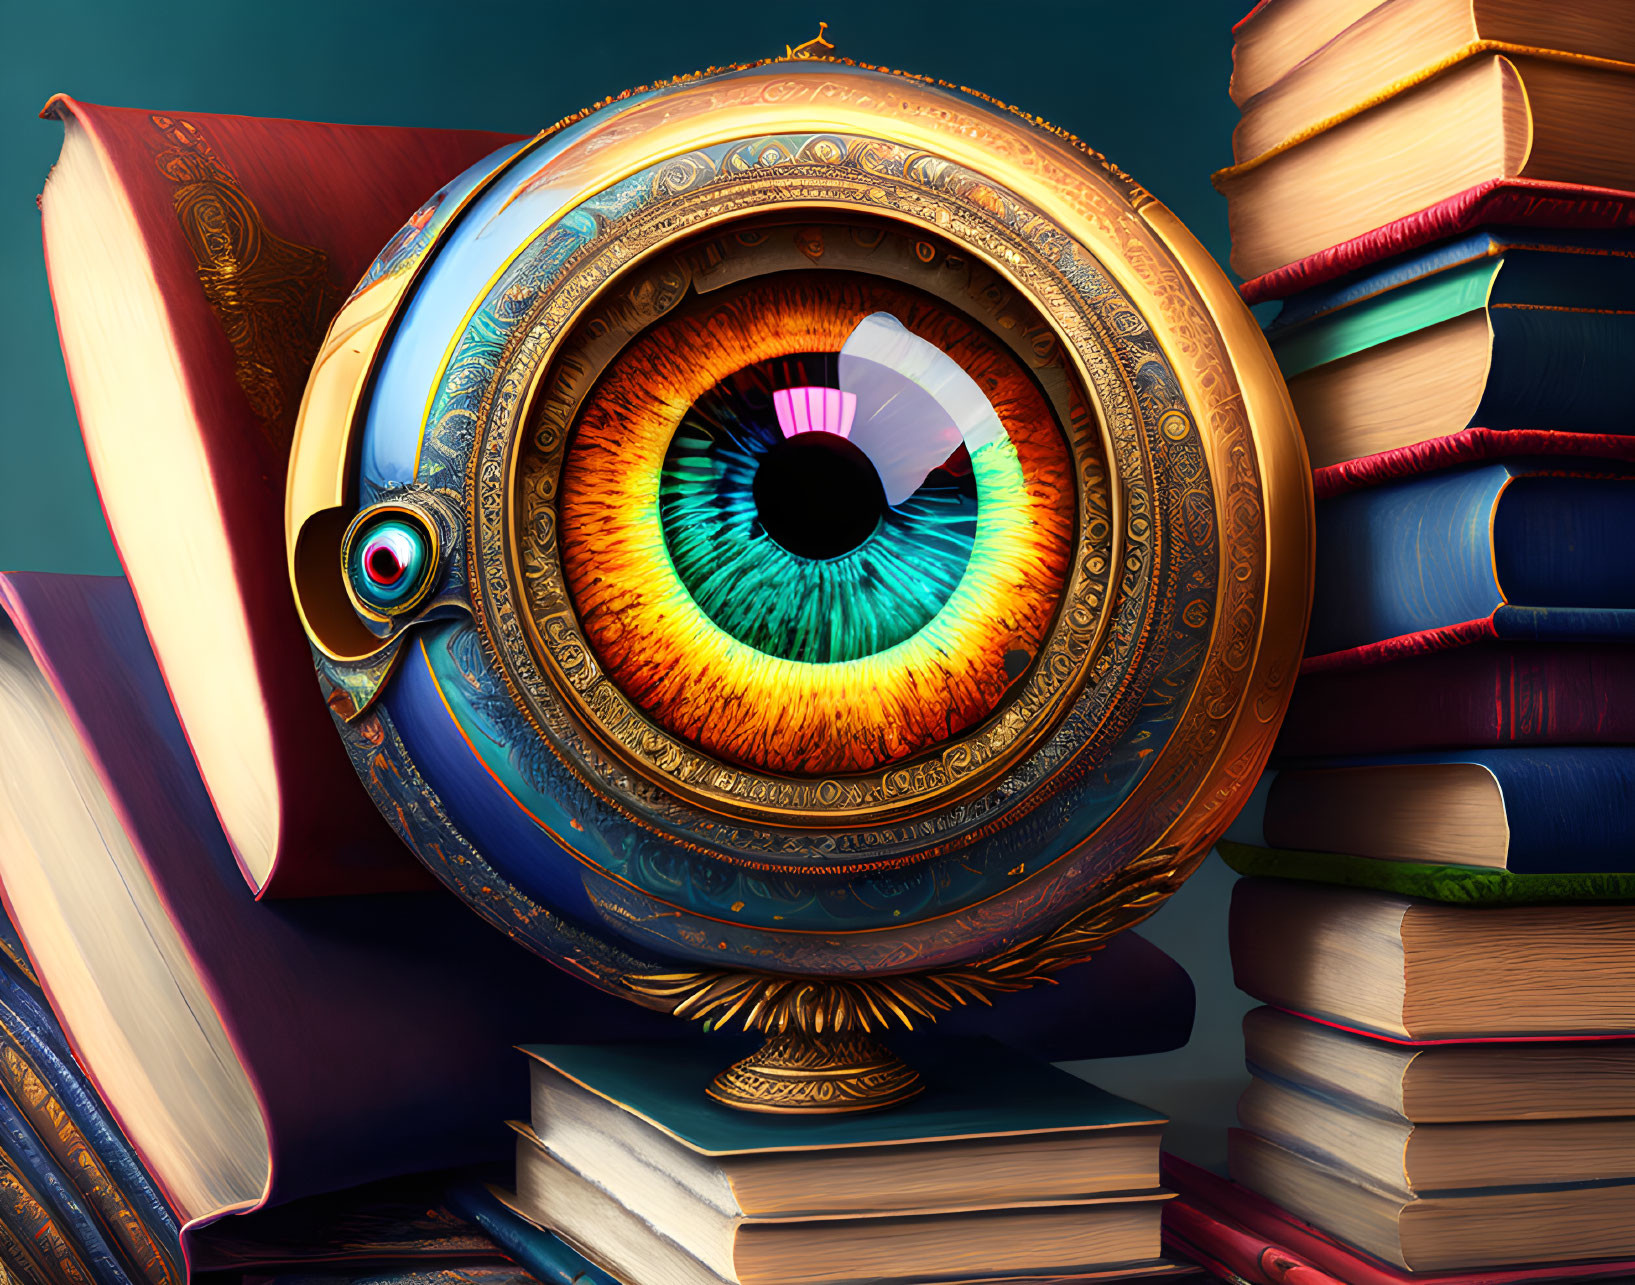 The Librarian has Eyes Everywhere